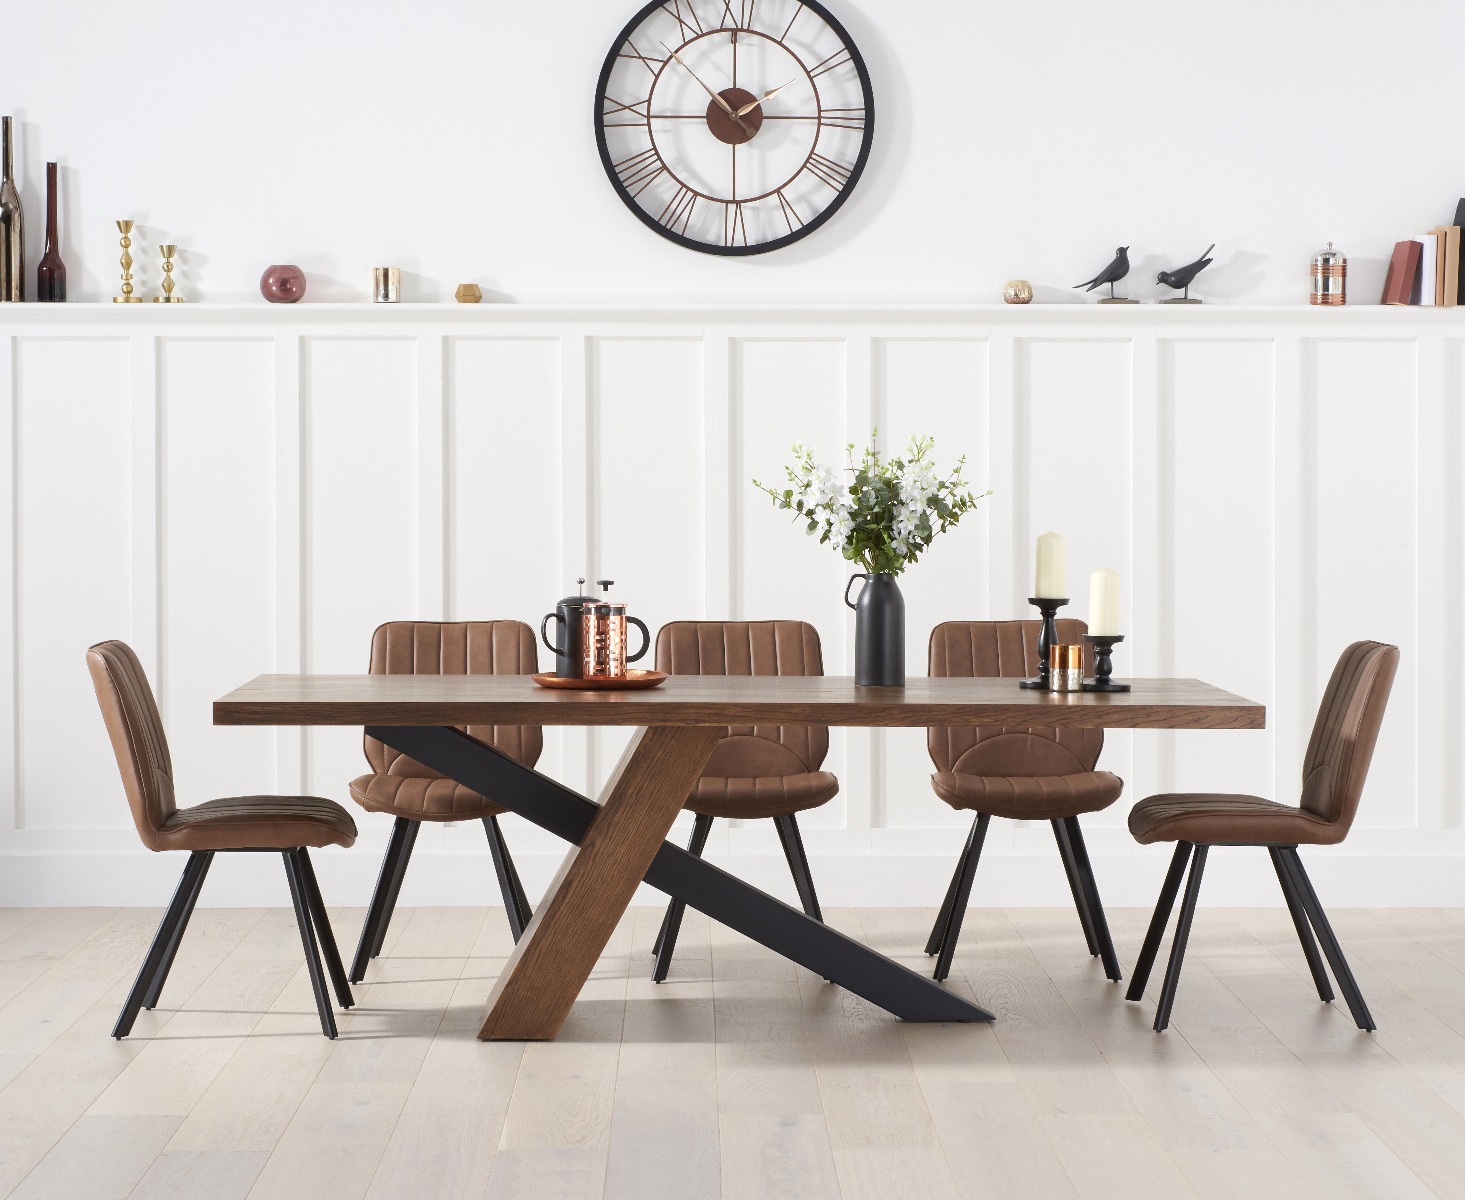 Michigan 180cm Rustic Oak And Metal Black Leg Industrial Dining Table With 6 Grey Hendrick Chairs